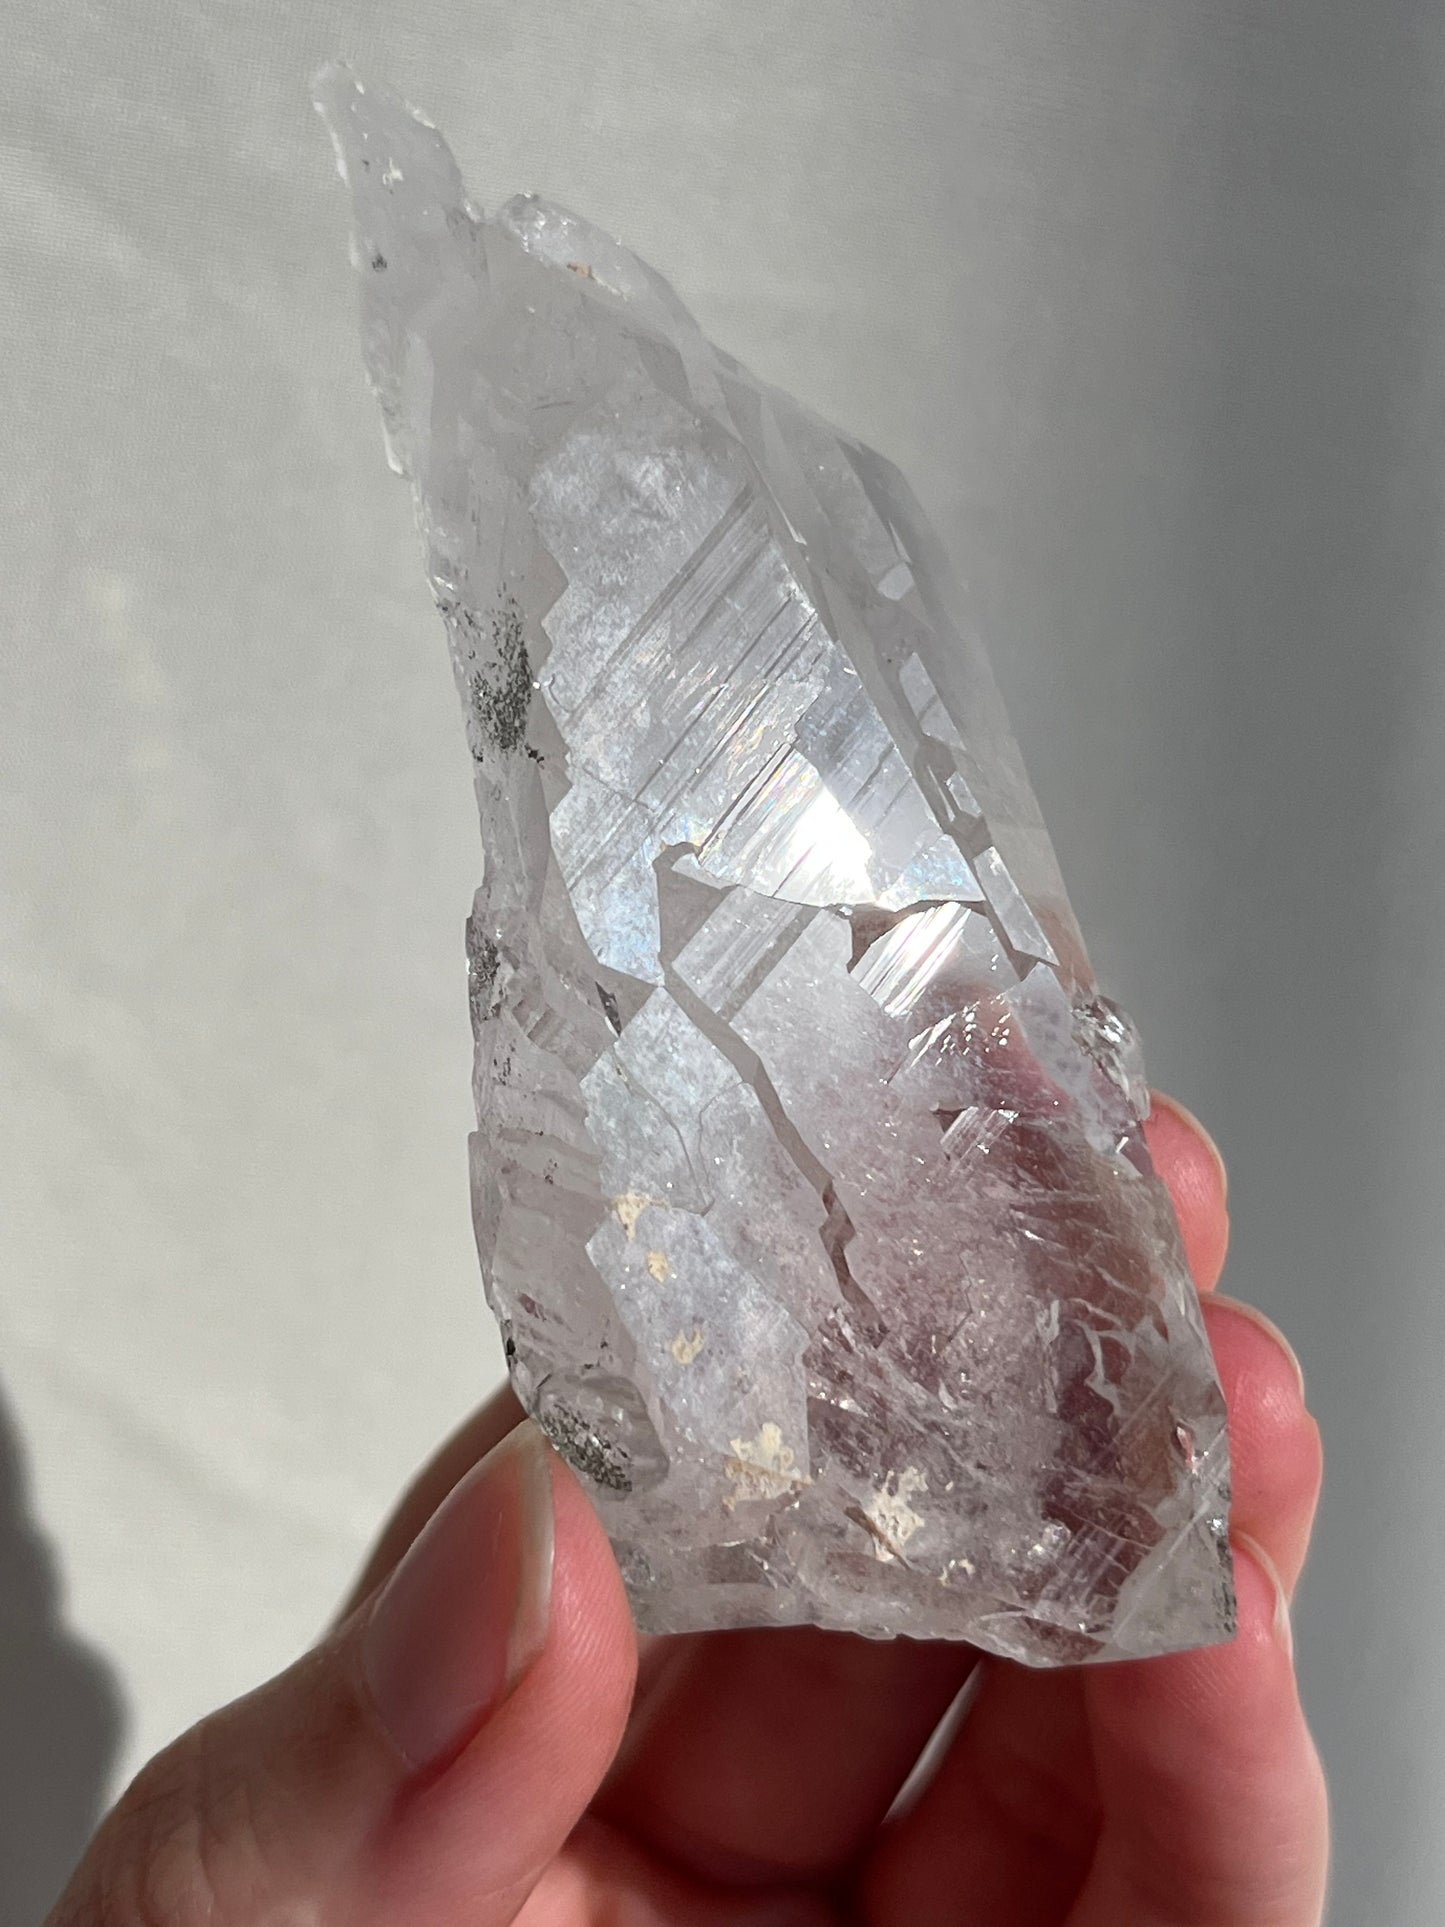 Etched Elestial Himalayan Quartz w/Raised Record Keeper Features, Natural Aura Coating & Sparkly Anatase #7